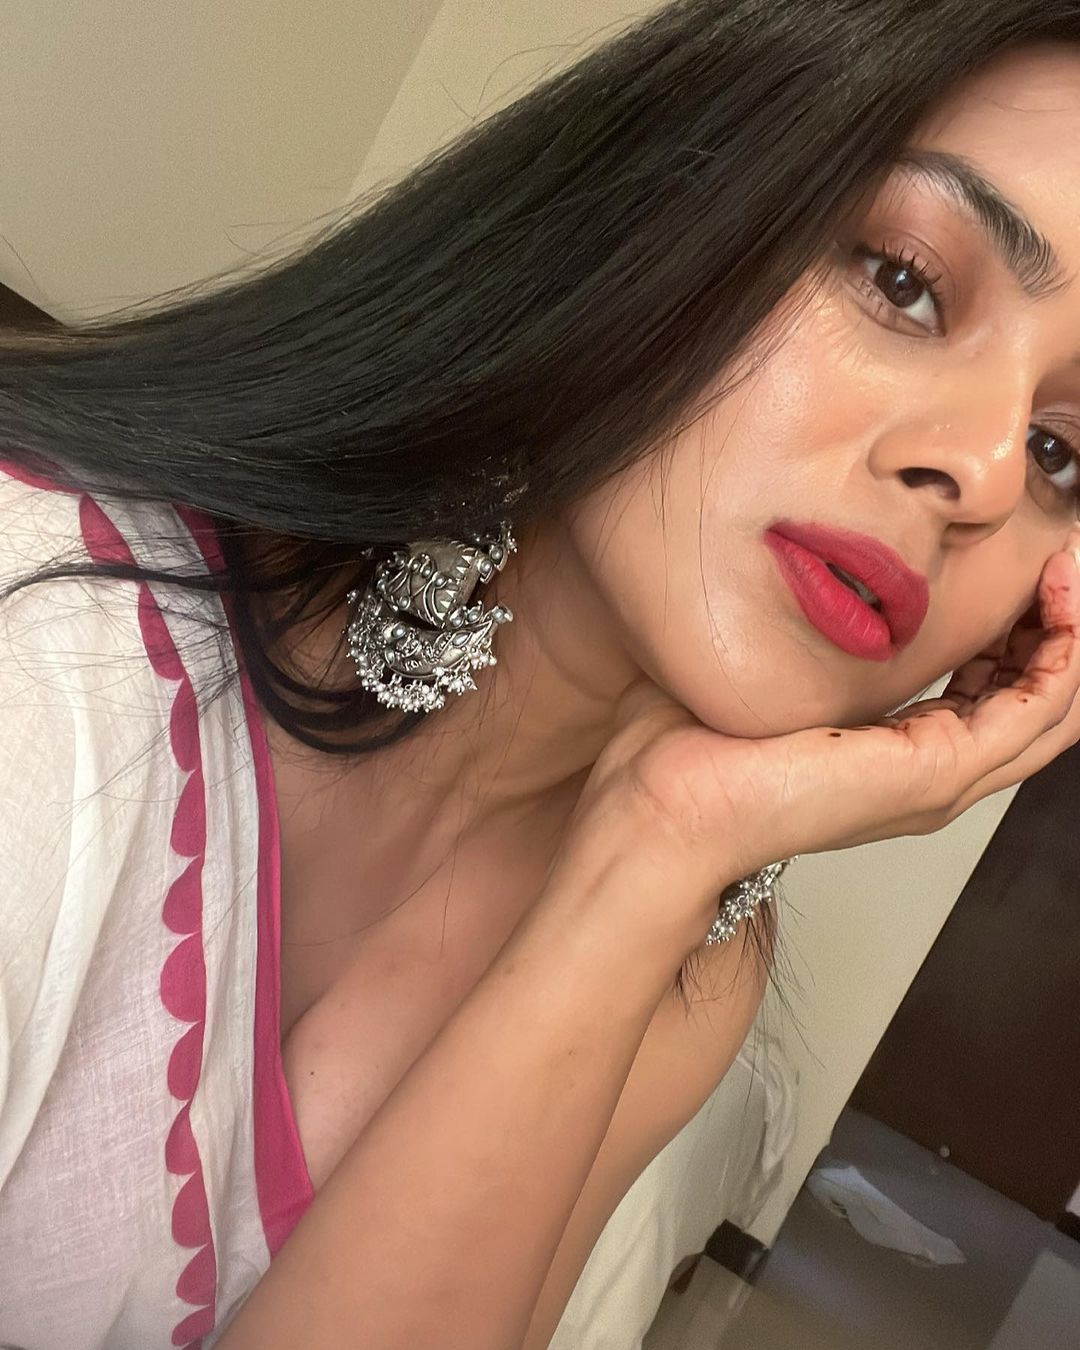 Actress hebah patel latest stylish and romantic clicks-Hebahpatel, Actresshebah, Hebah Patel Photos,Spicy Hot Pics,Images,High Resolution WallPapers Download